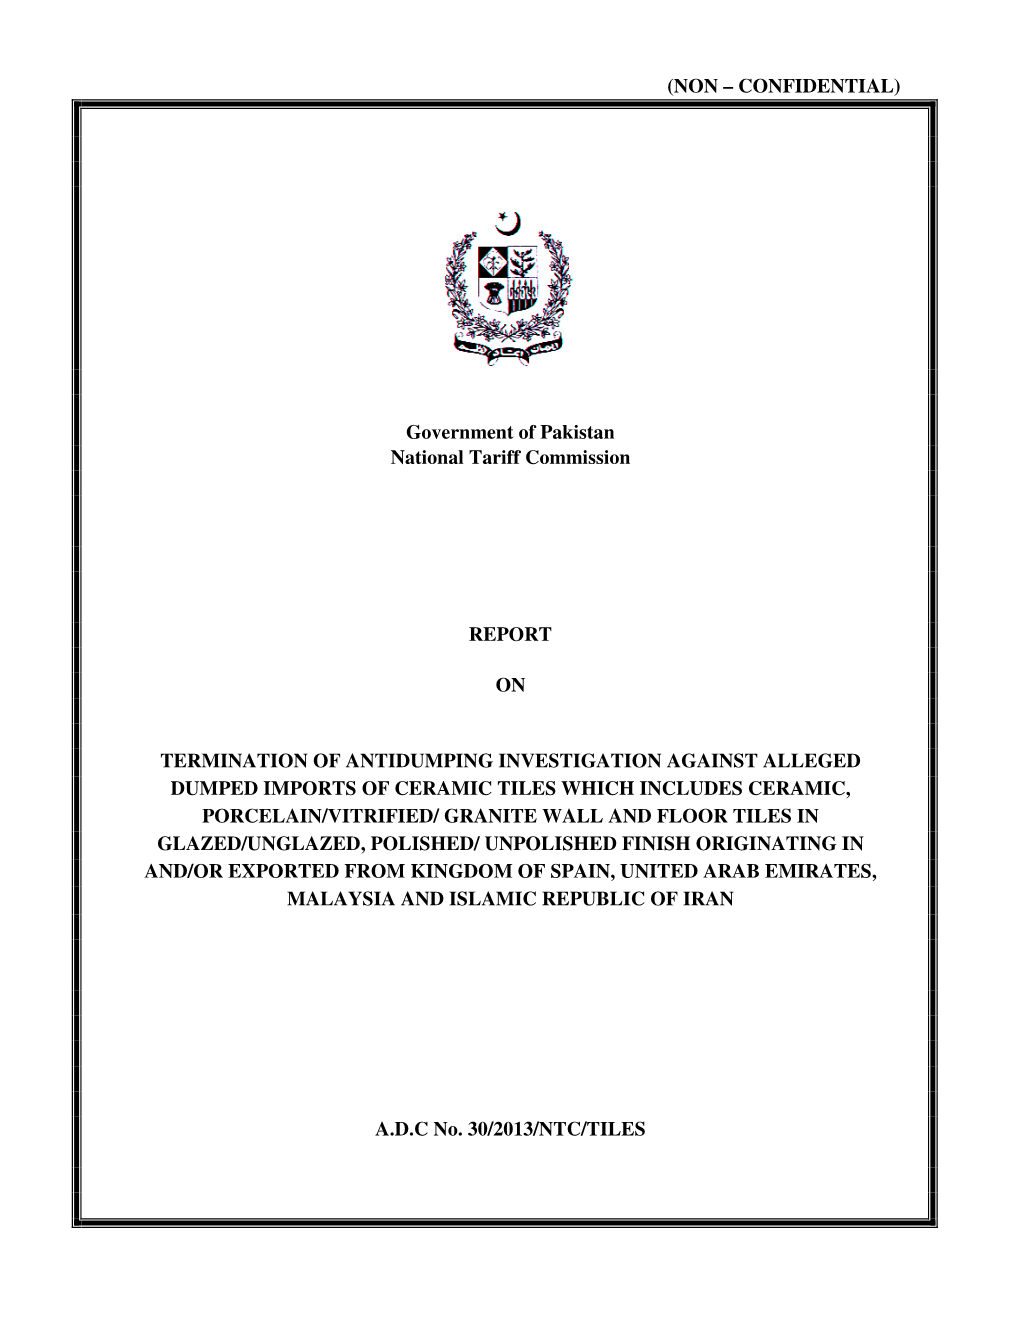 (NON – CONFIDENTIAL) Government of Pakistan National Tariff